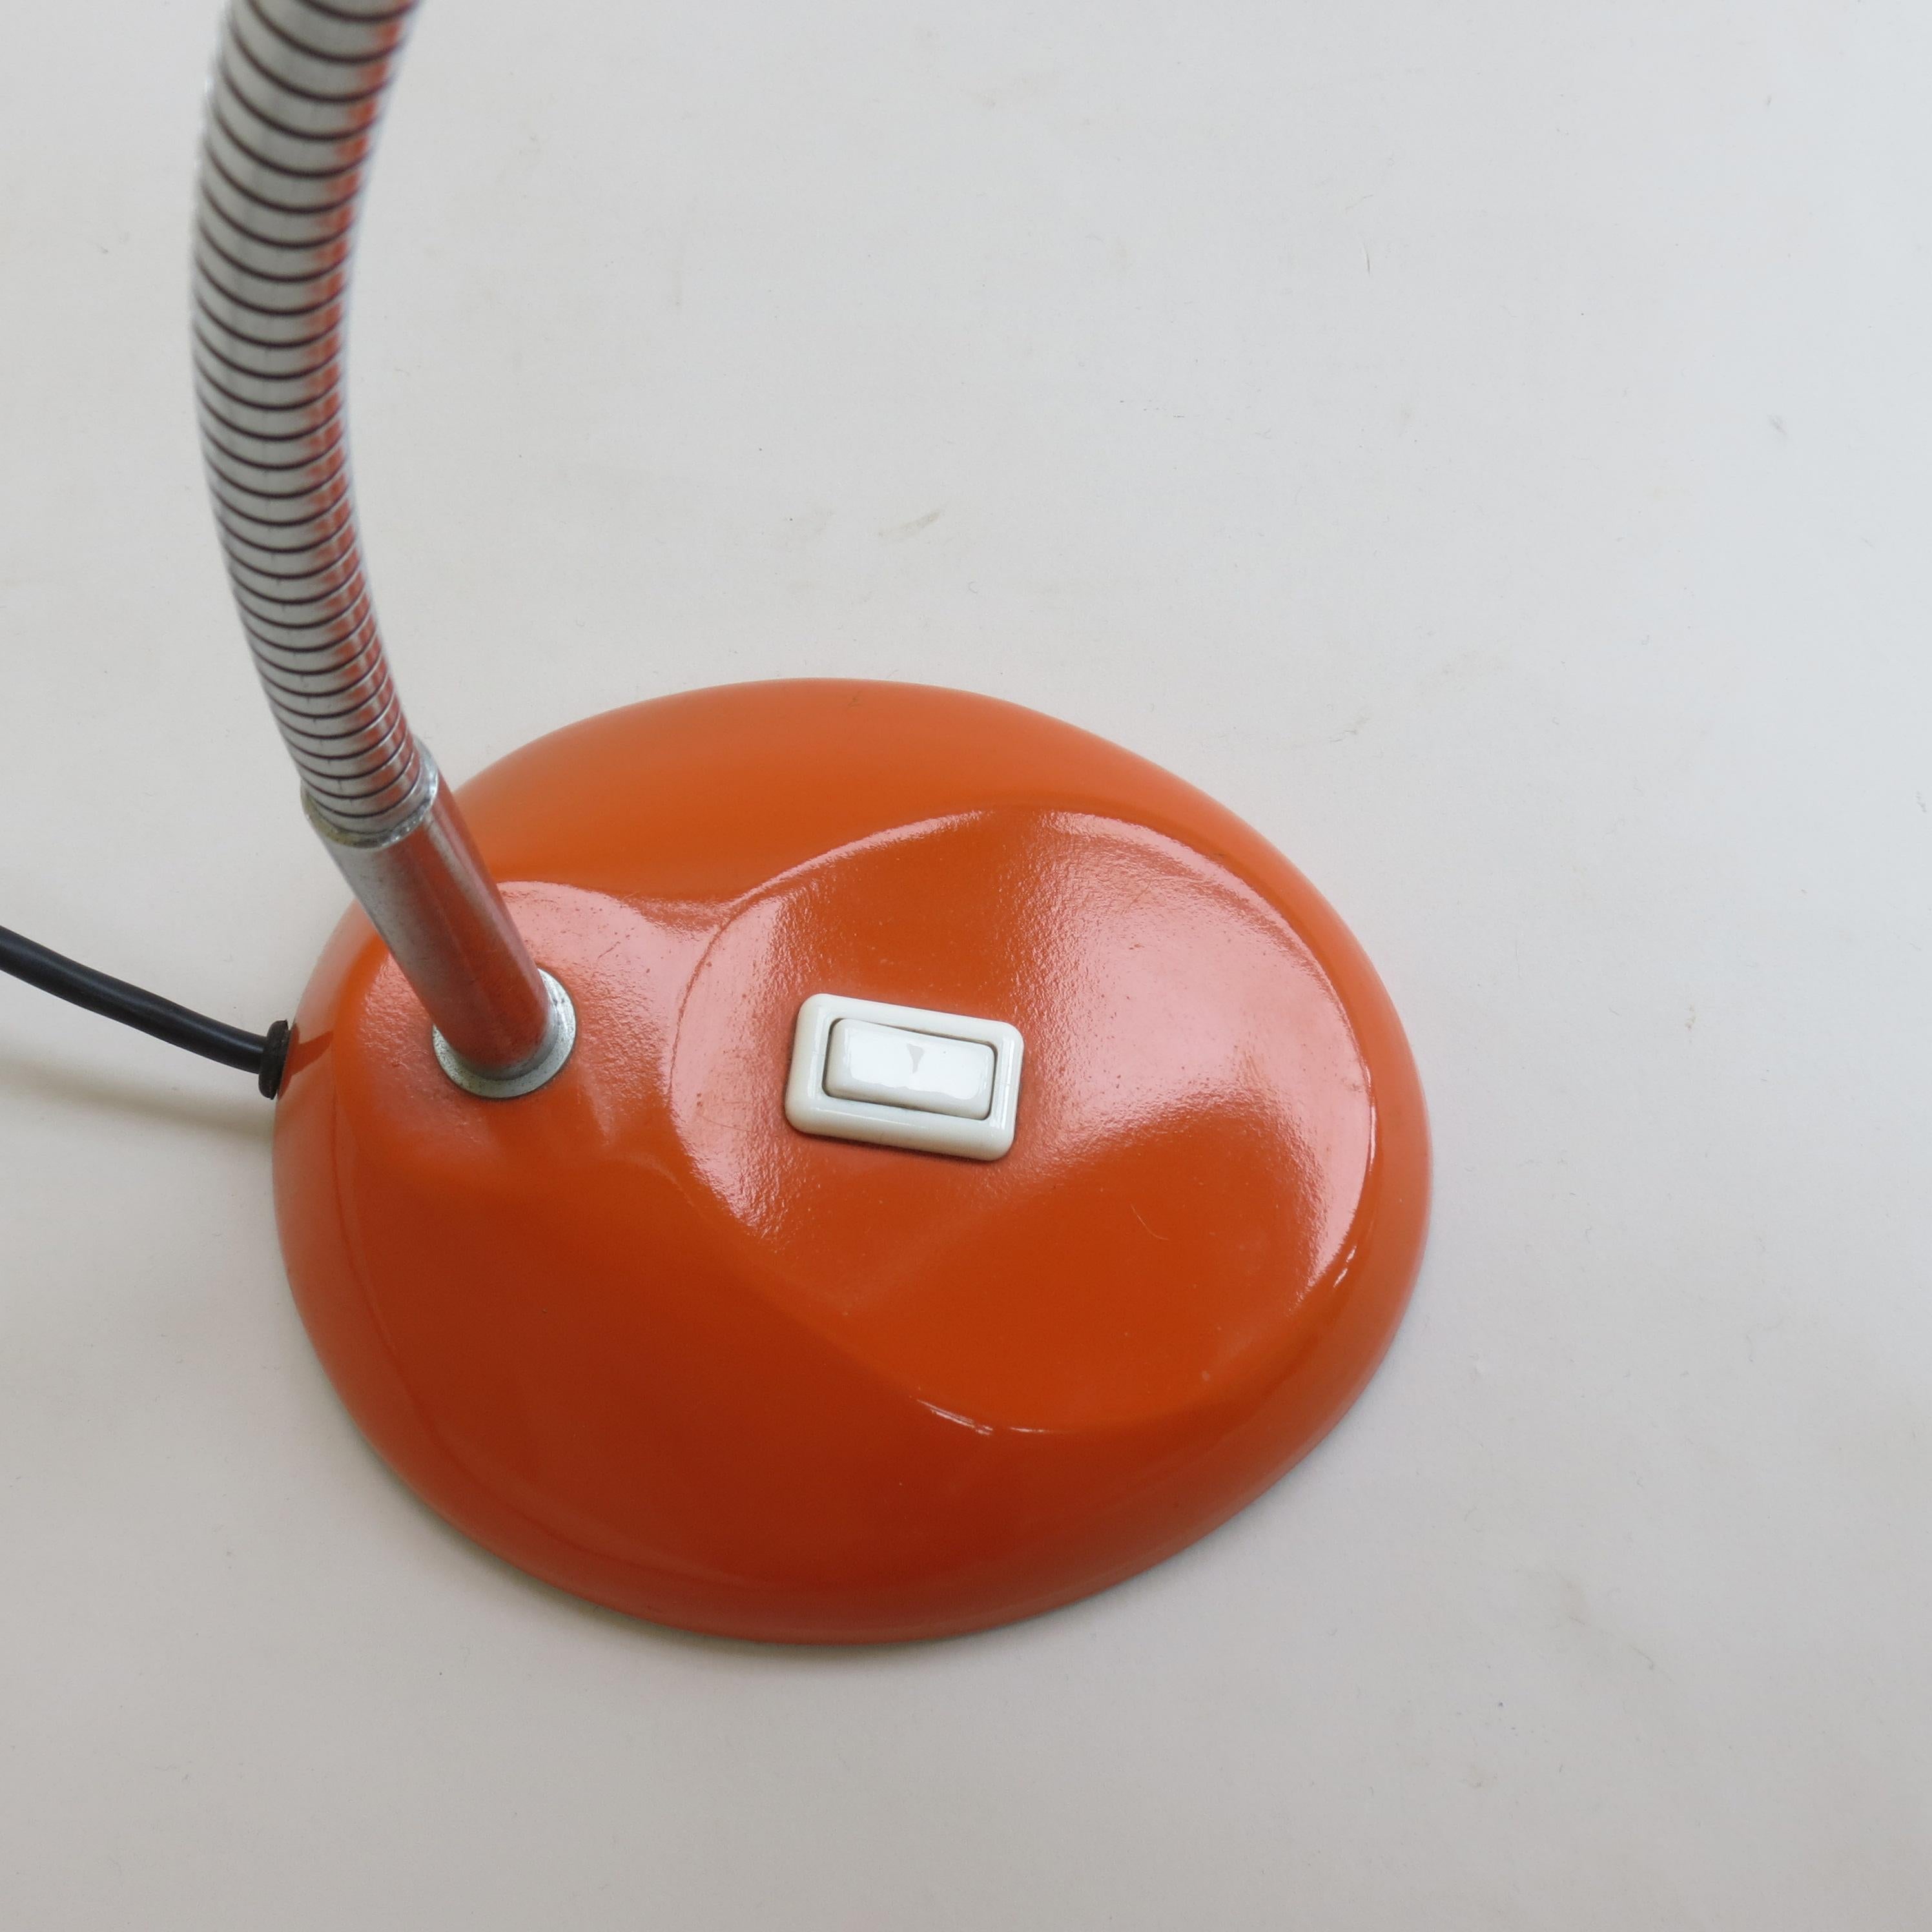 English 1960s Orange Vintage Metal Desk Lamp by H Terry and Son